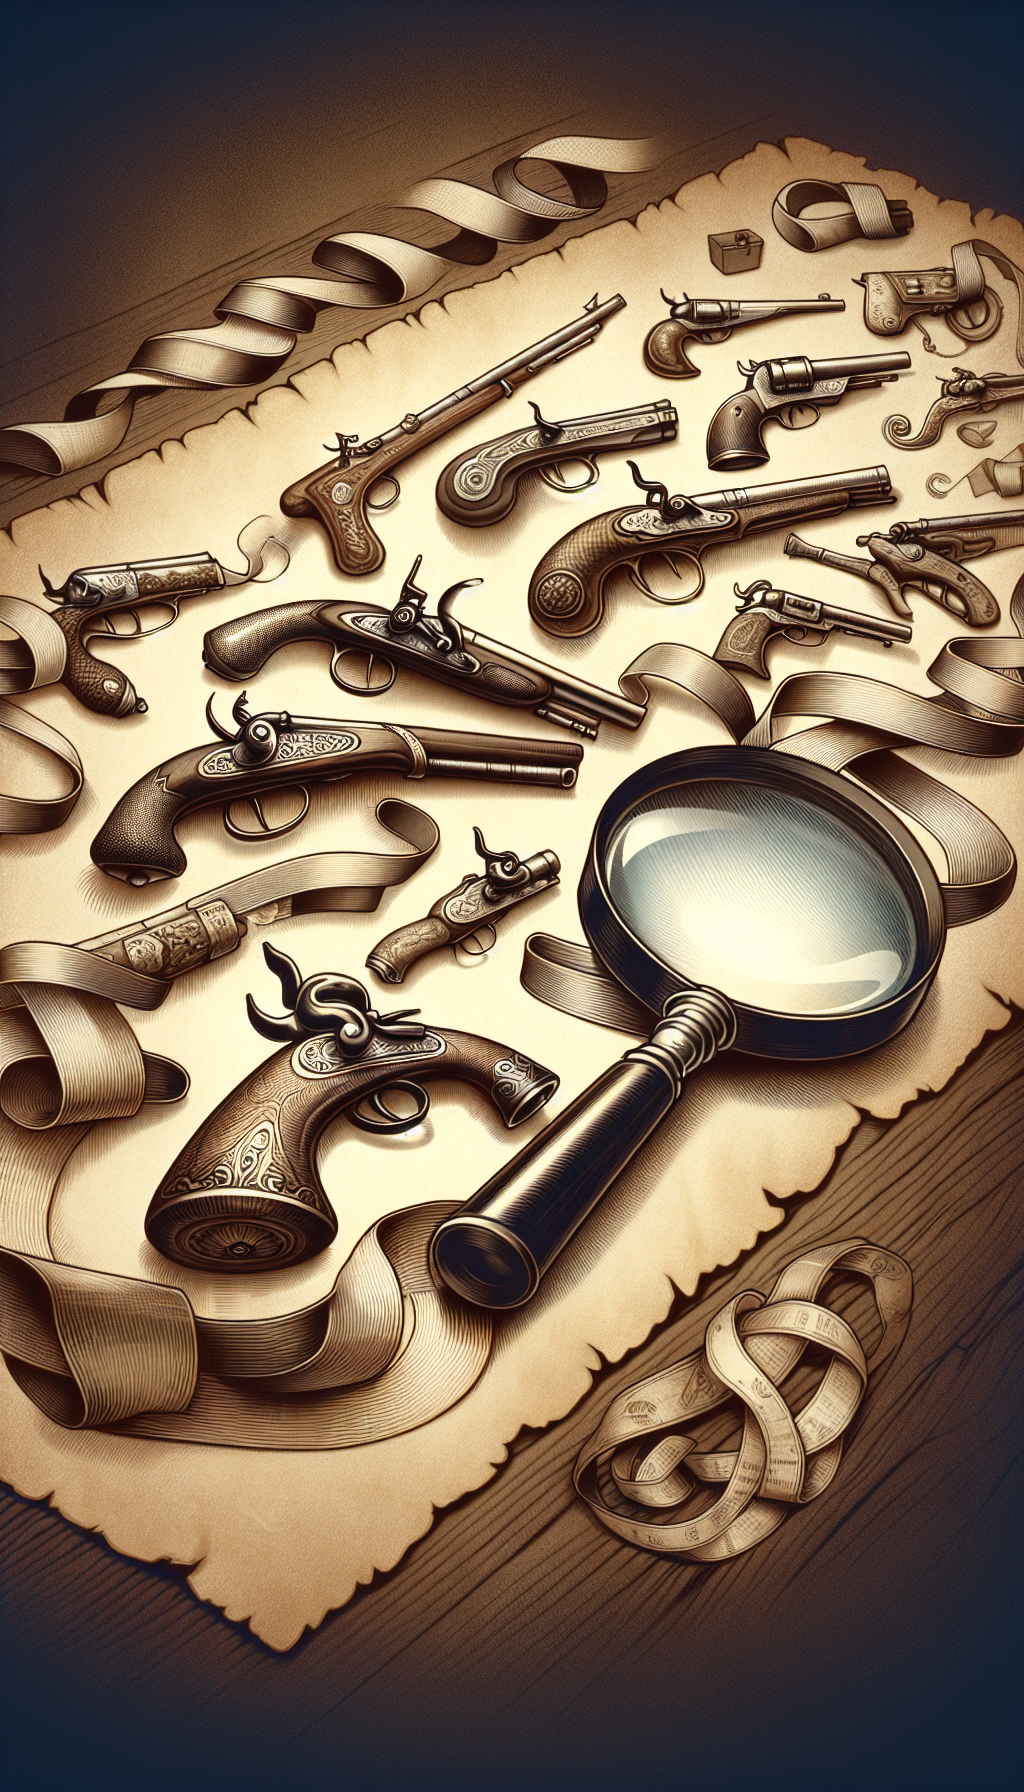 An illustration showcases a timeline ribbon unfurling like aged parchment across the canvas, with distinct pistols from various historical eras resting on its curls. In the foreground, a magnifying glass hovers over an ornate flintlock pistol, highlighting marks and intricacies, symbolizing the art of antique pistol identification, while the background faintly hints at a craftsman's workshop in sepia tones.